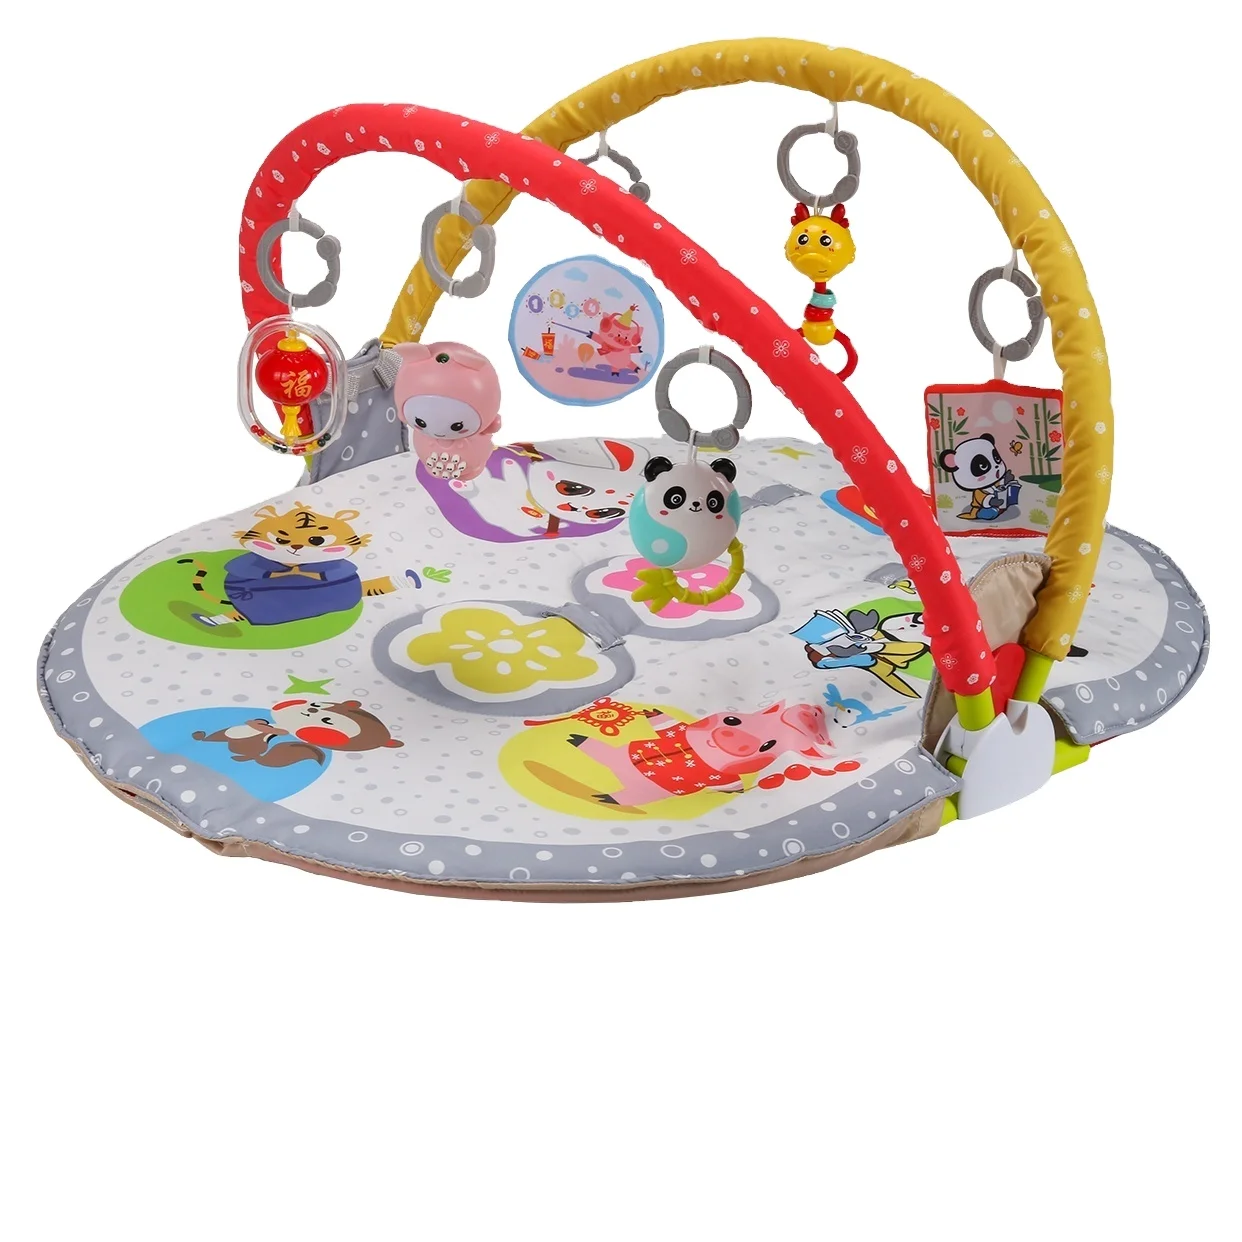 Fuying Wholesale educational soft gym carpet musical playmat activity baby piano mat (1600227829927)